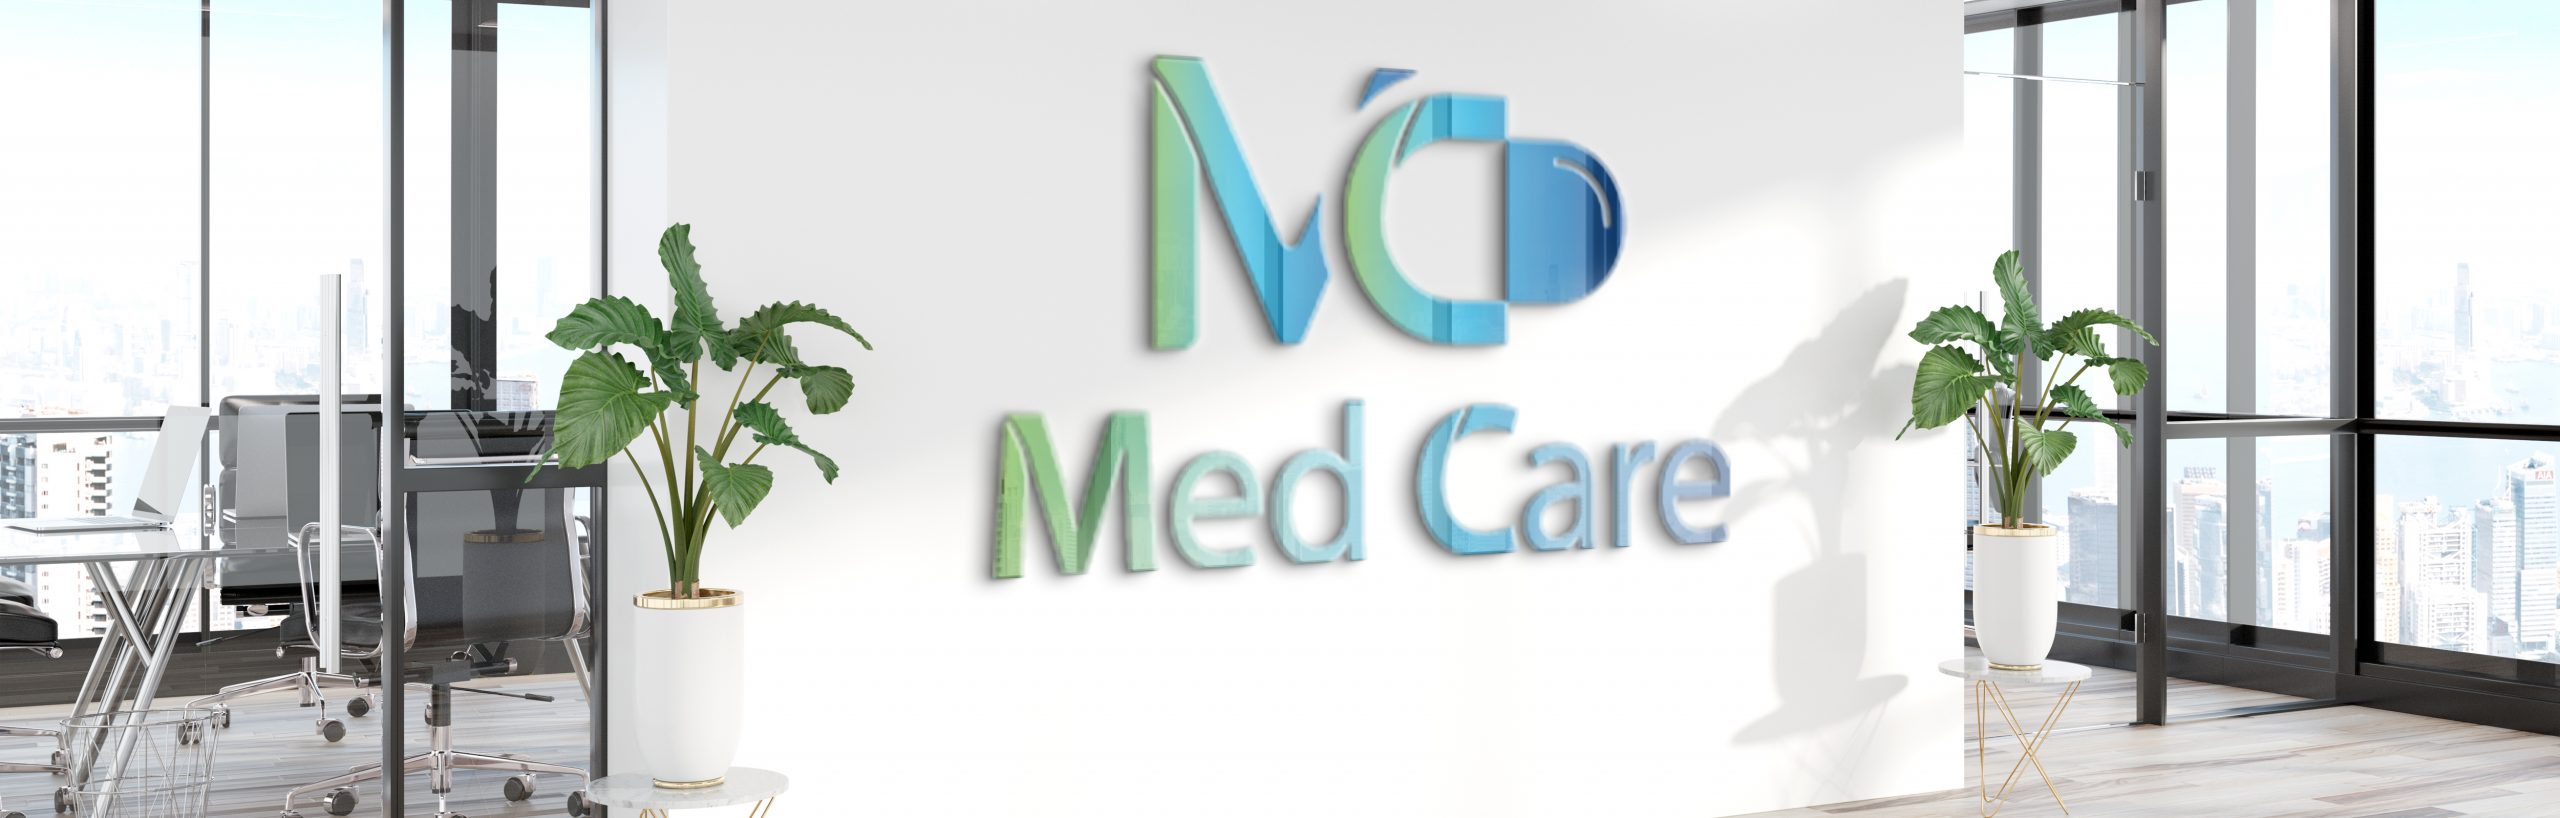 About MedCare